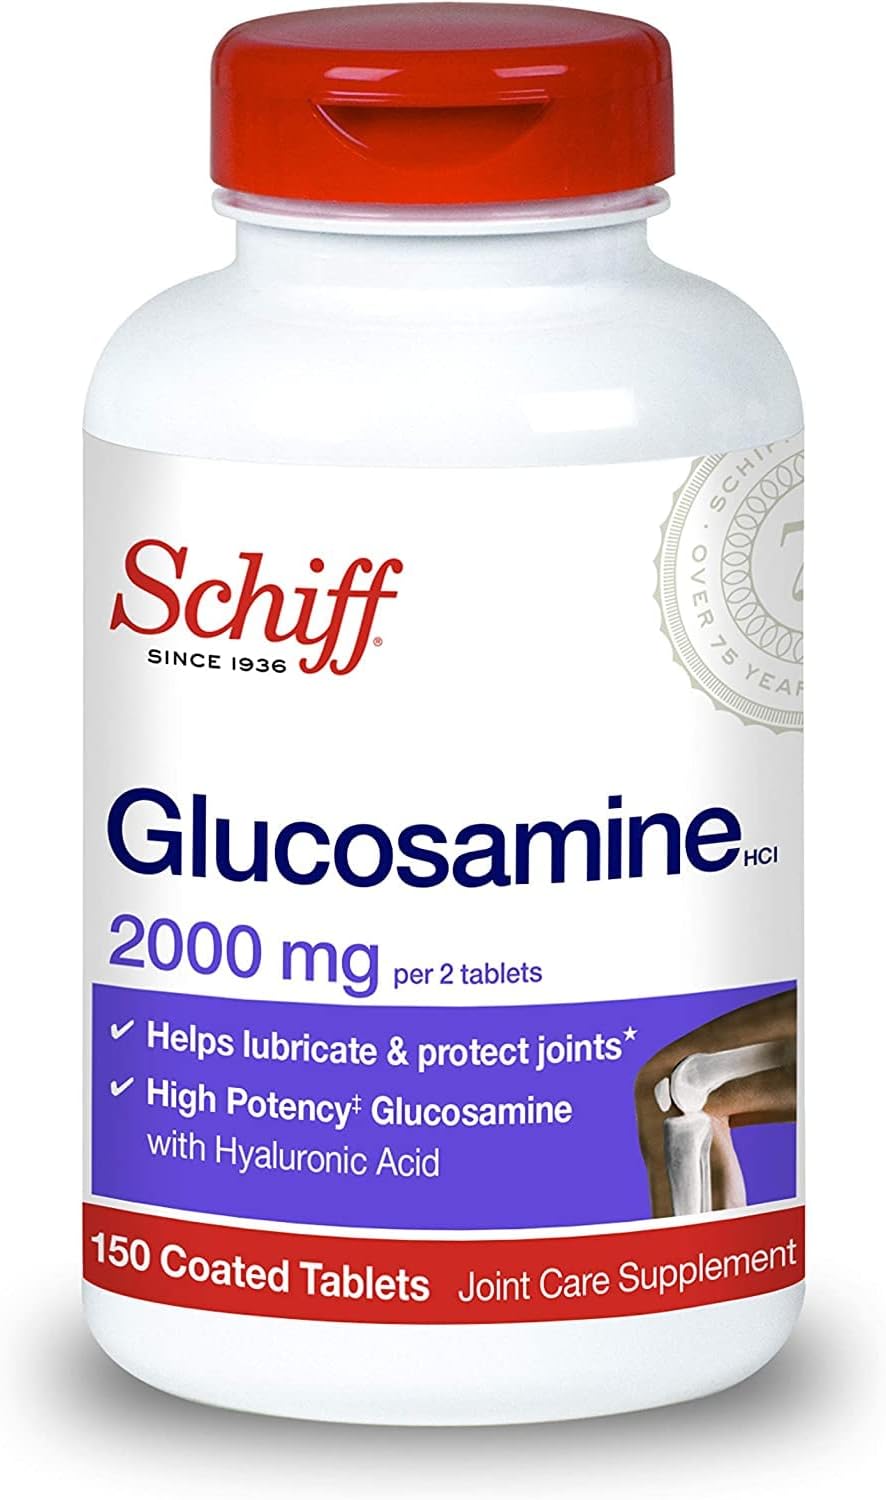 SCHIFF Glucosamine 2000Mg With Hyaluronic Acid, 150 Tablets - Joint Supplement (Pack Of 3)